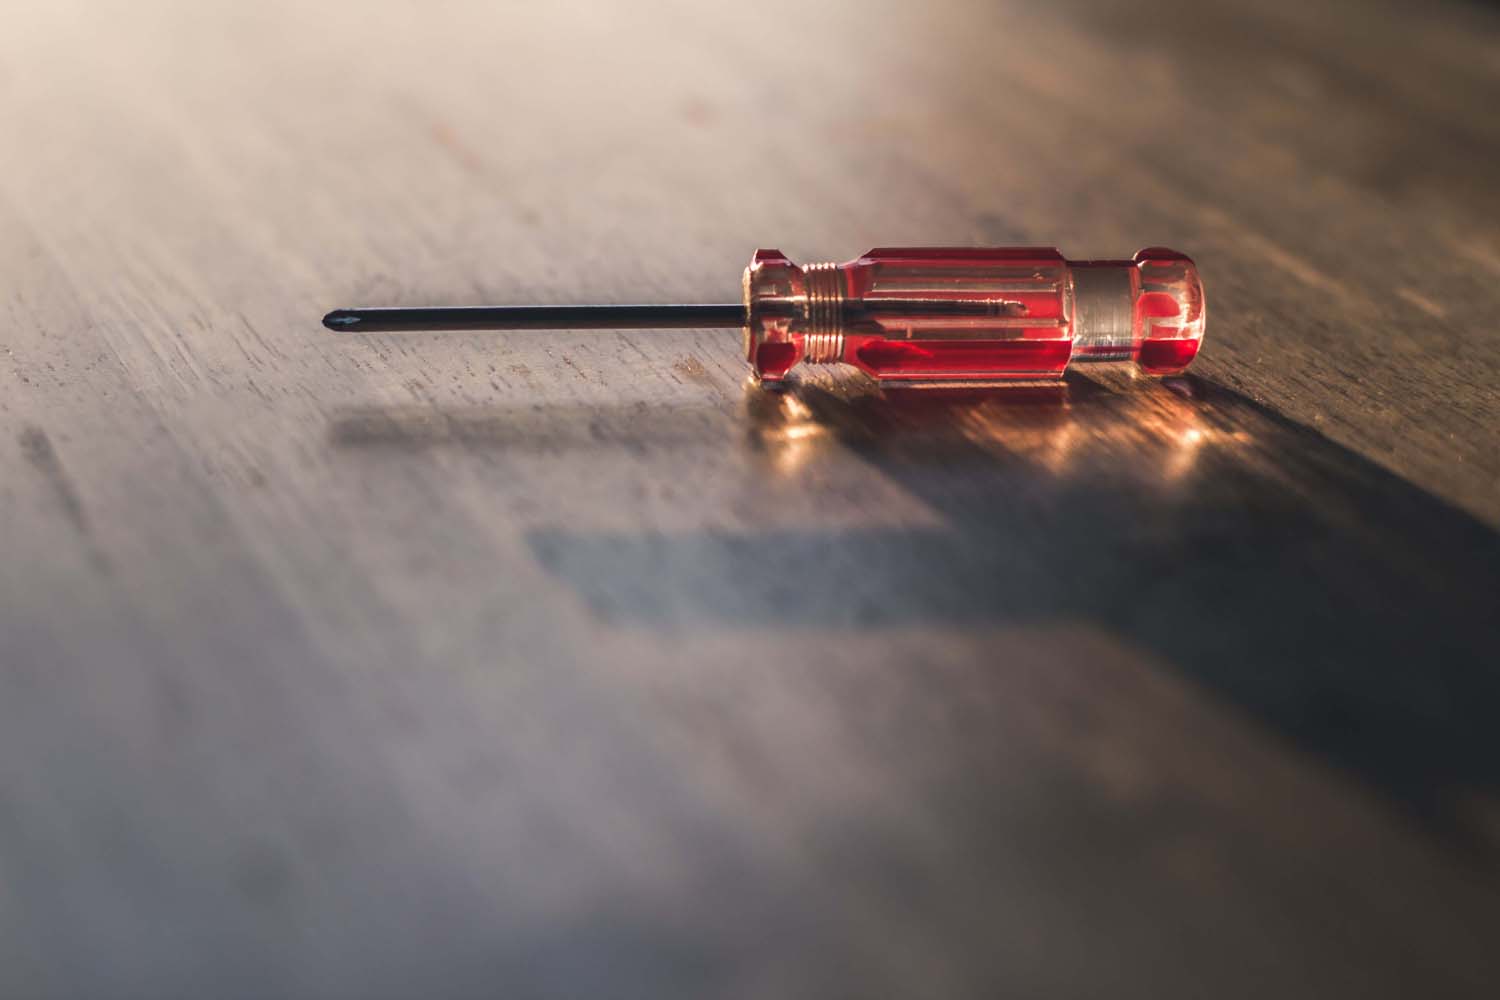 A close-up of a red-handled Phillips head screwdriver resting on a wooden surface, highlighting the importance of reliable tools in property repairs and maintenance.